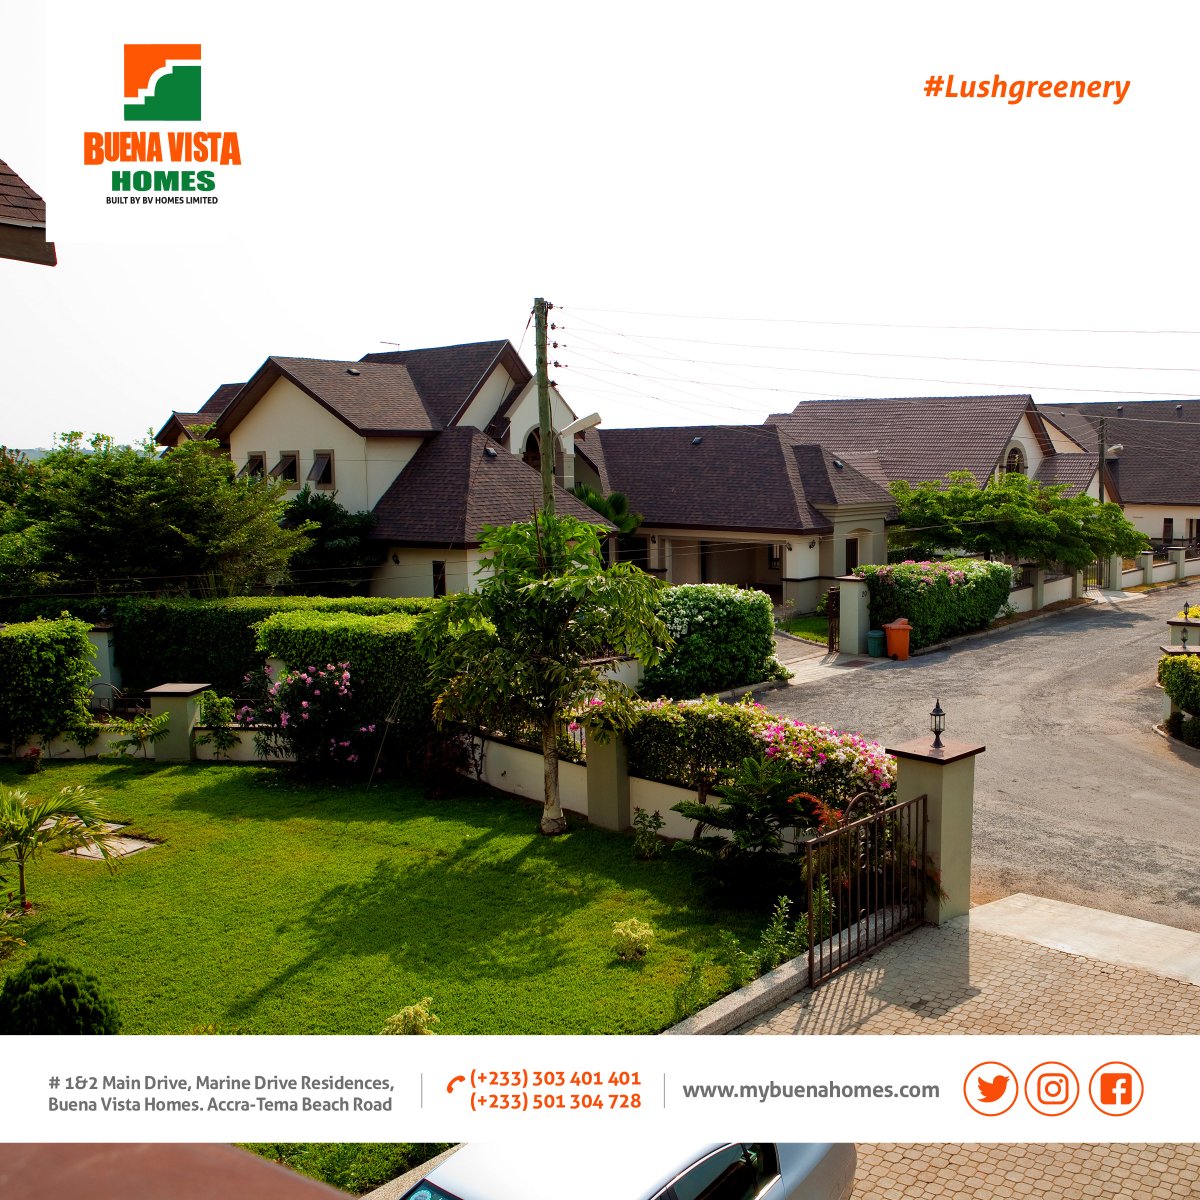 Green spaces increase community appeal and improve property values. We believe that one of the most cost effective ways to boost a home’s appeal is by providing attractive landscape
#TheBuenaVistaExperience #mybuenahomes #apartment #realestate #HomeSweetHome #Accra #lushgreenery